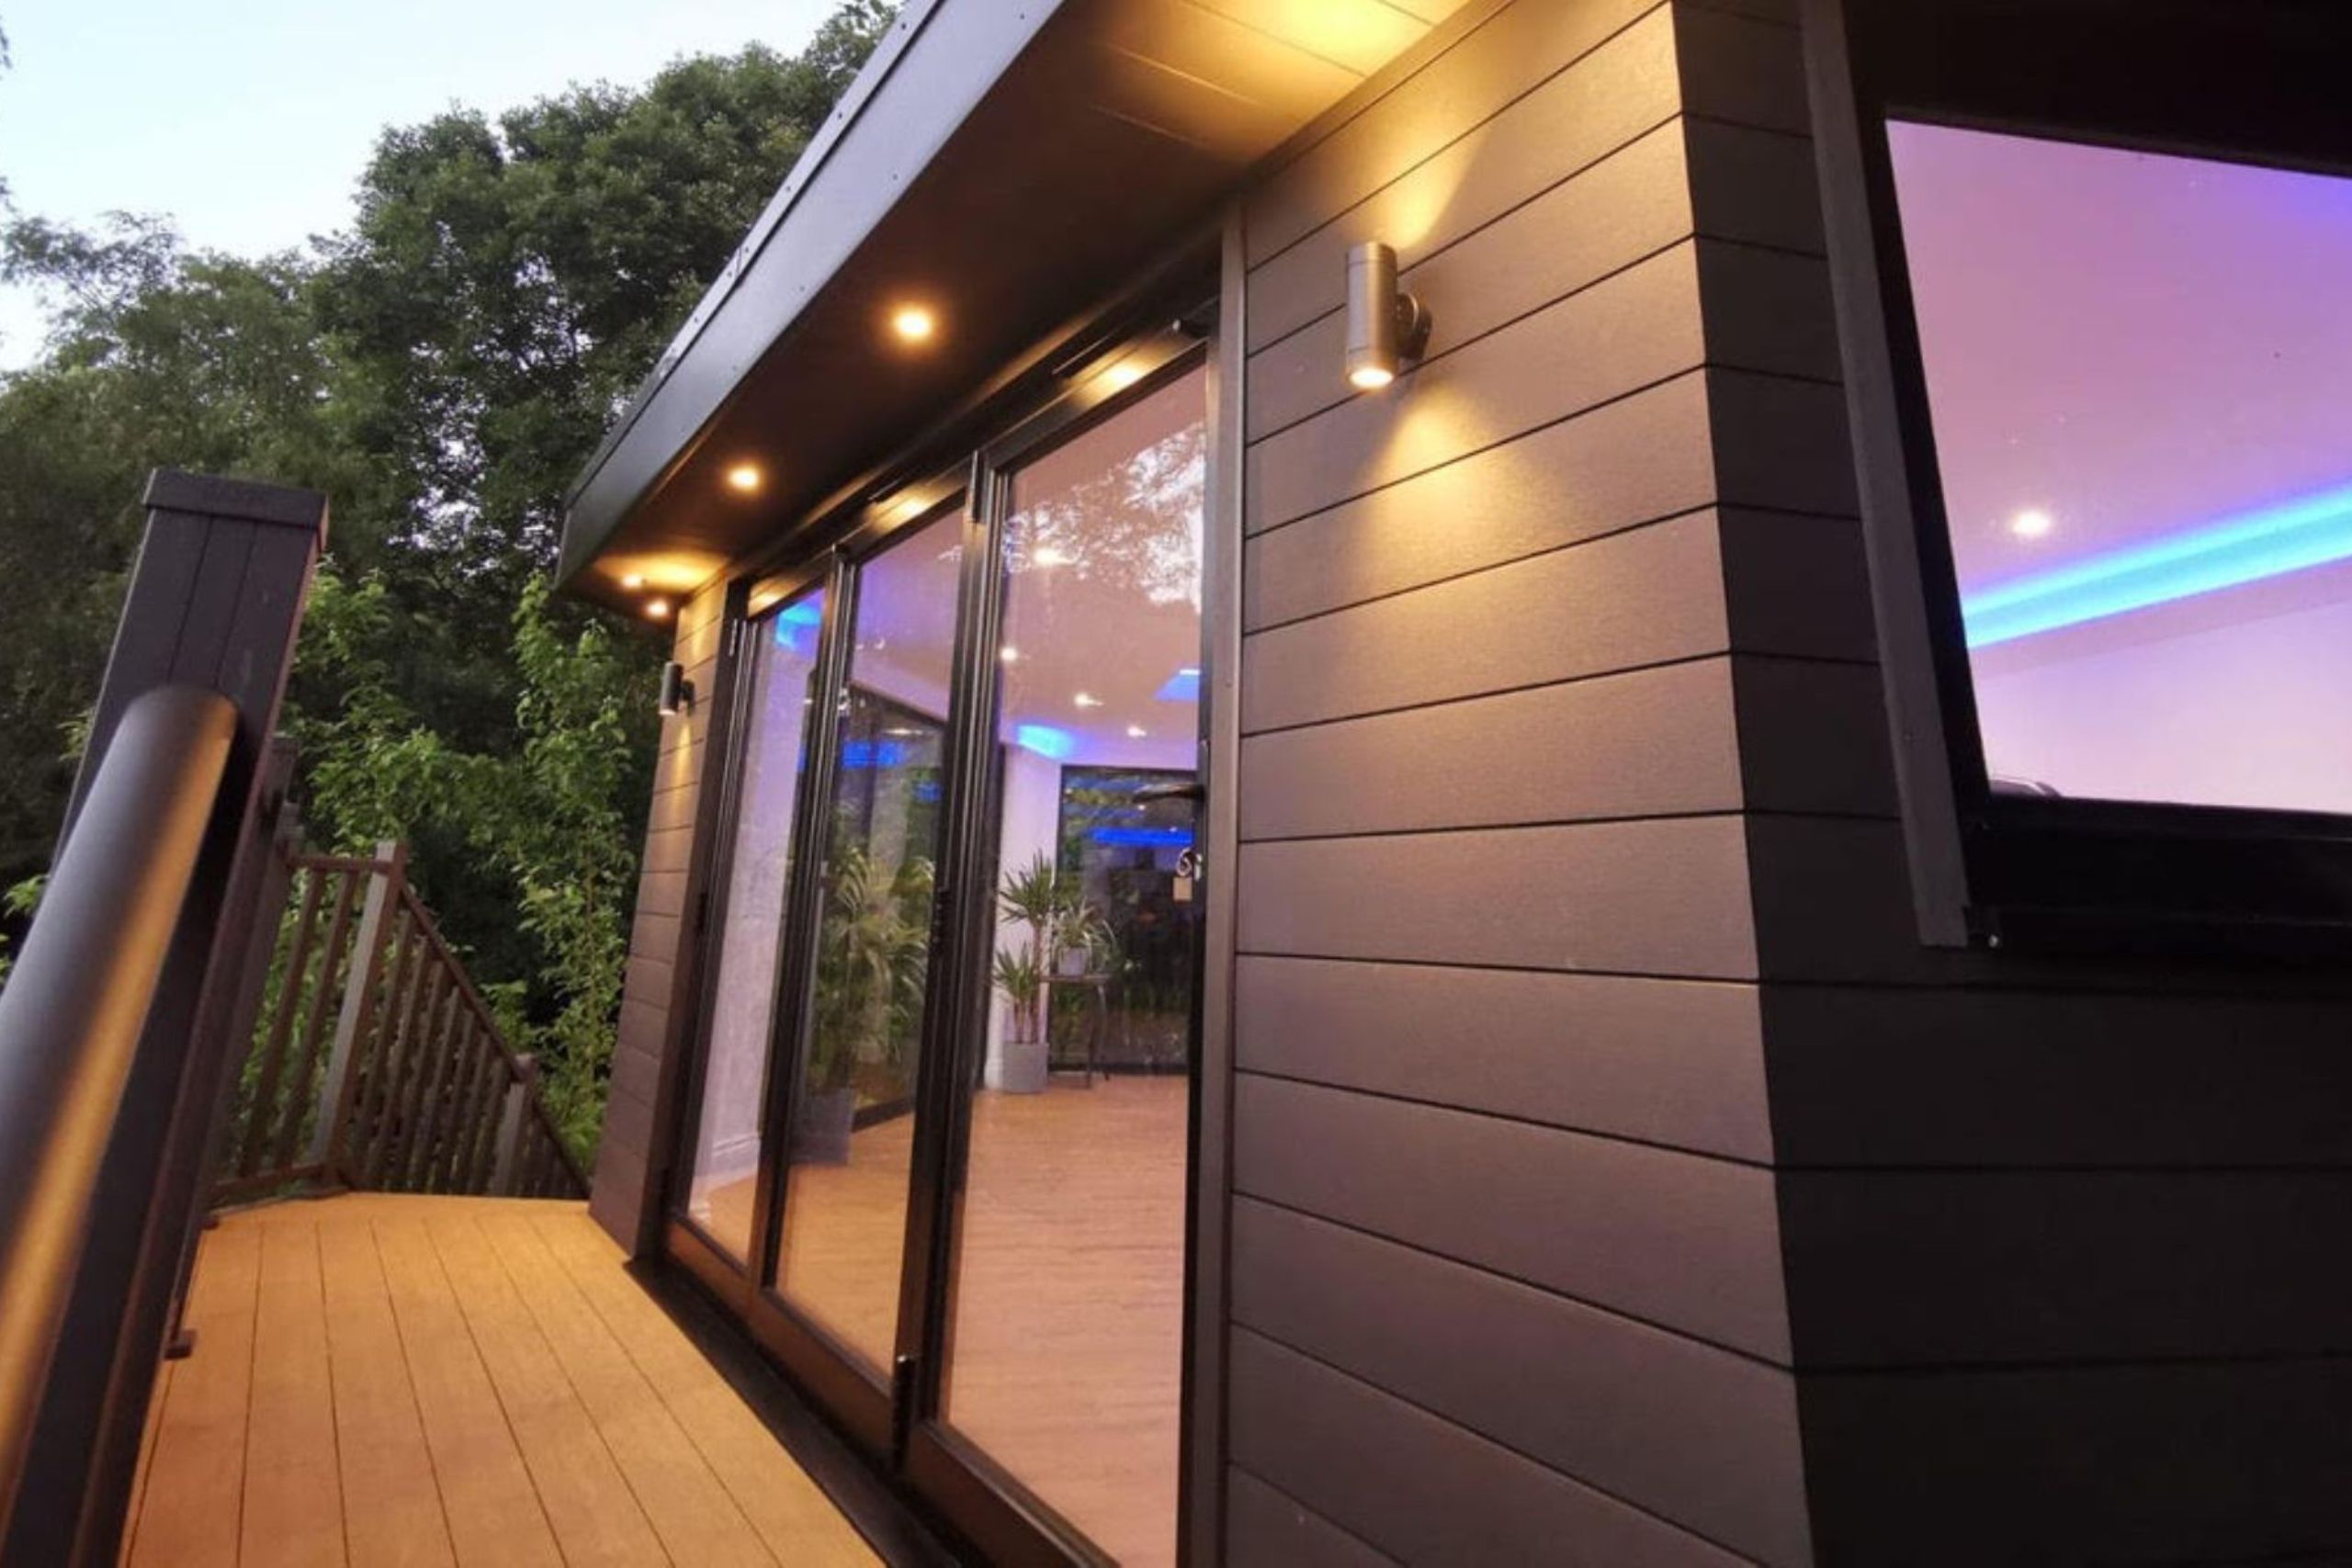 Why Now’s the Time to Invest in Cladding on Your House